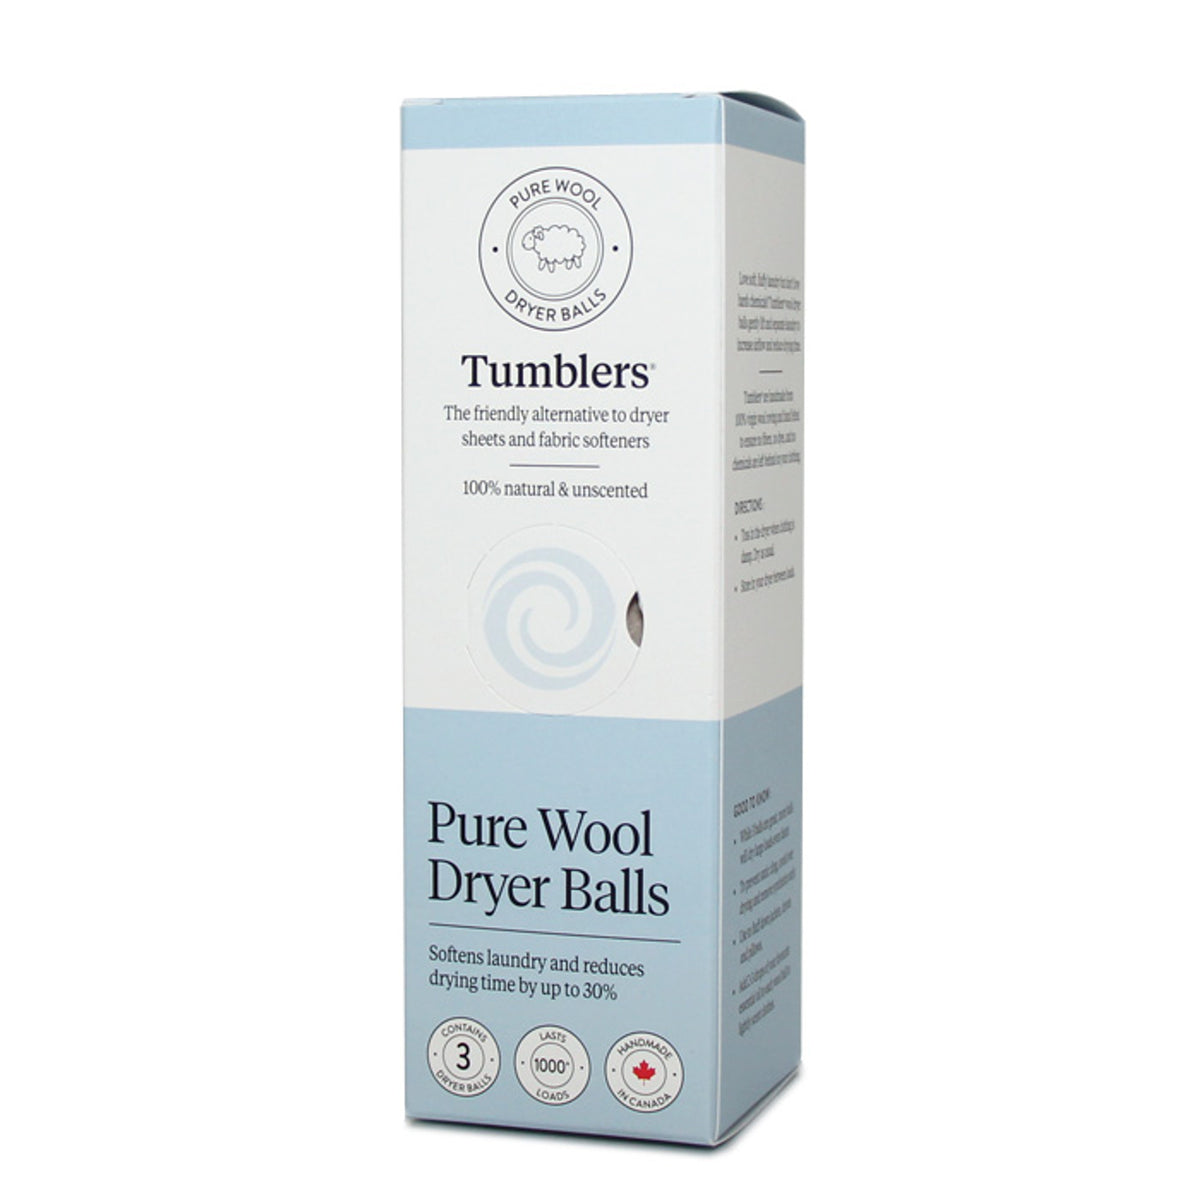 FOREVER NEW TUMBLERS DRYER BALLS PURE WOOL